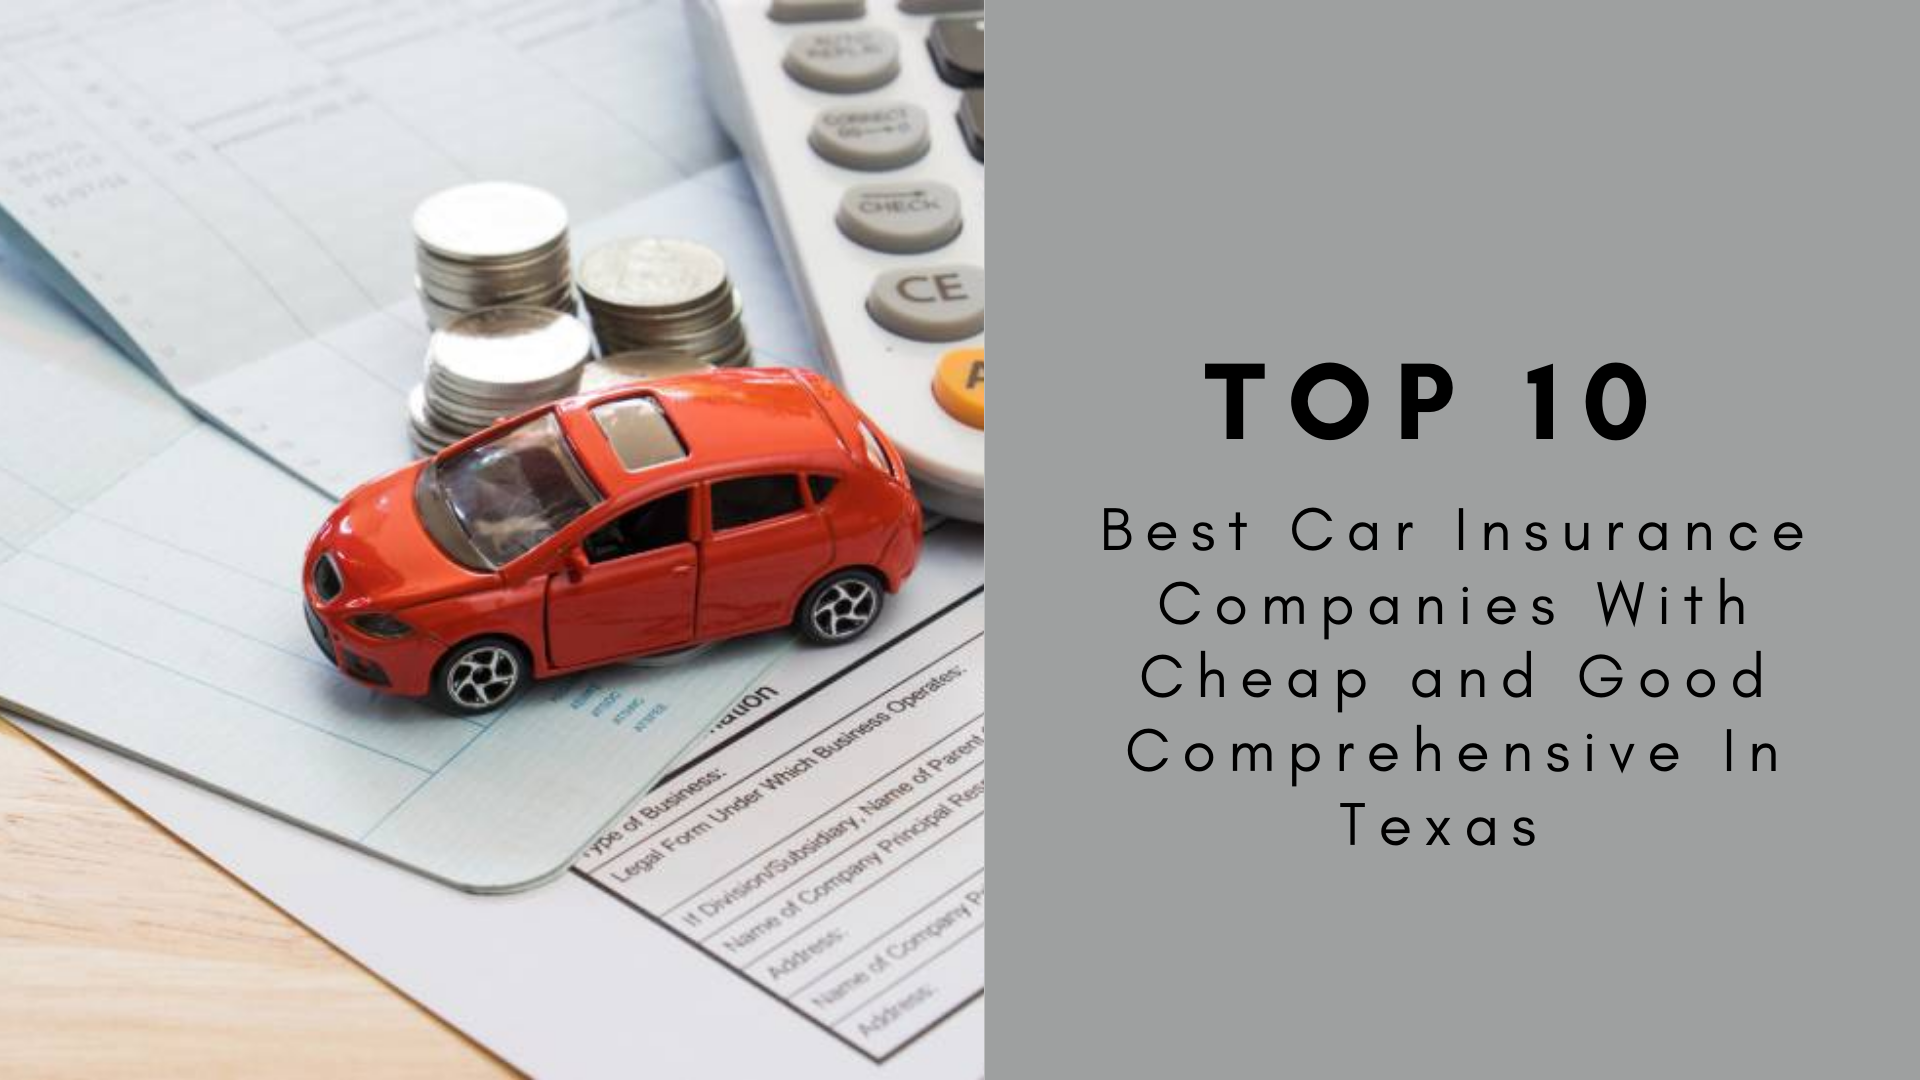 Top 10 Best Car Insurance Companies In Texas - Cheapest Quotes